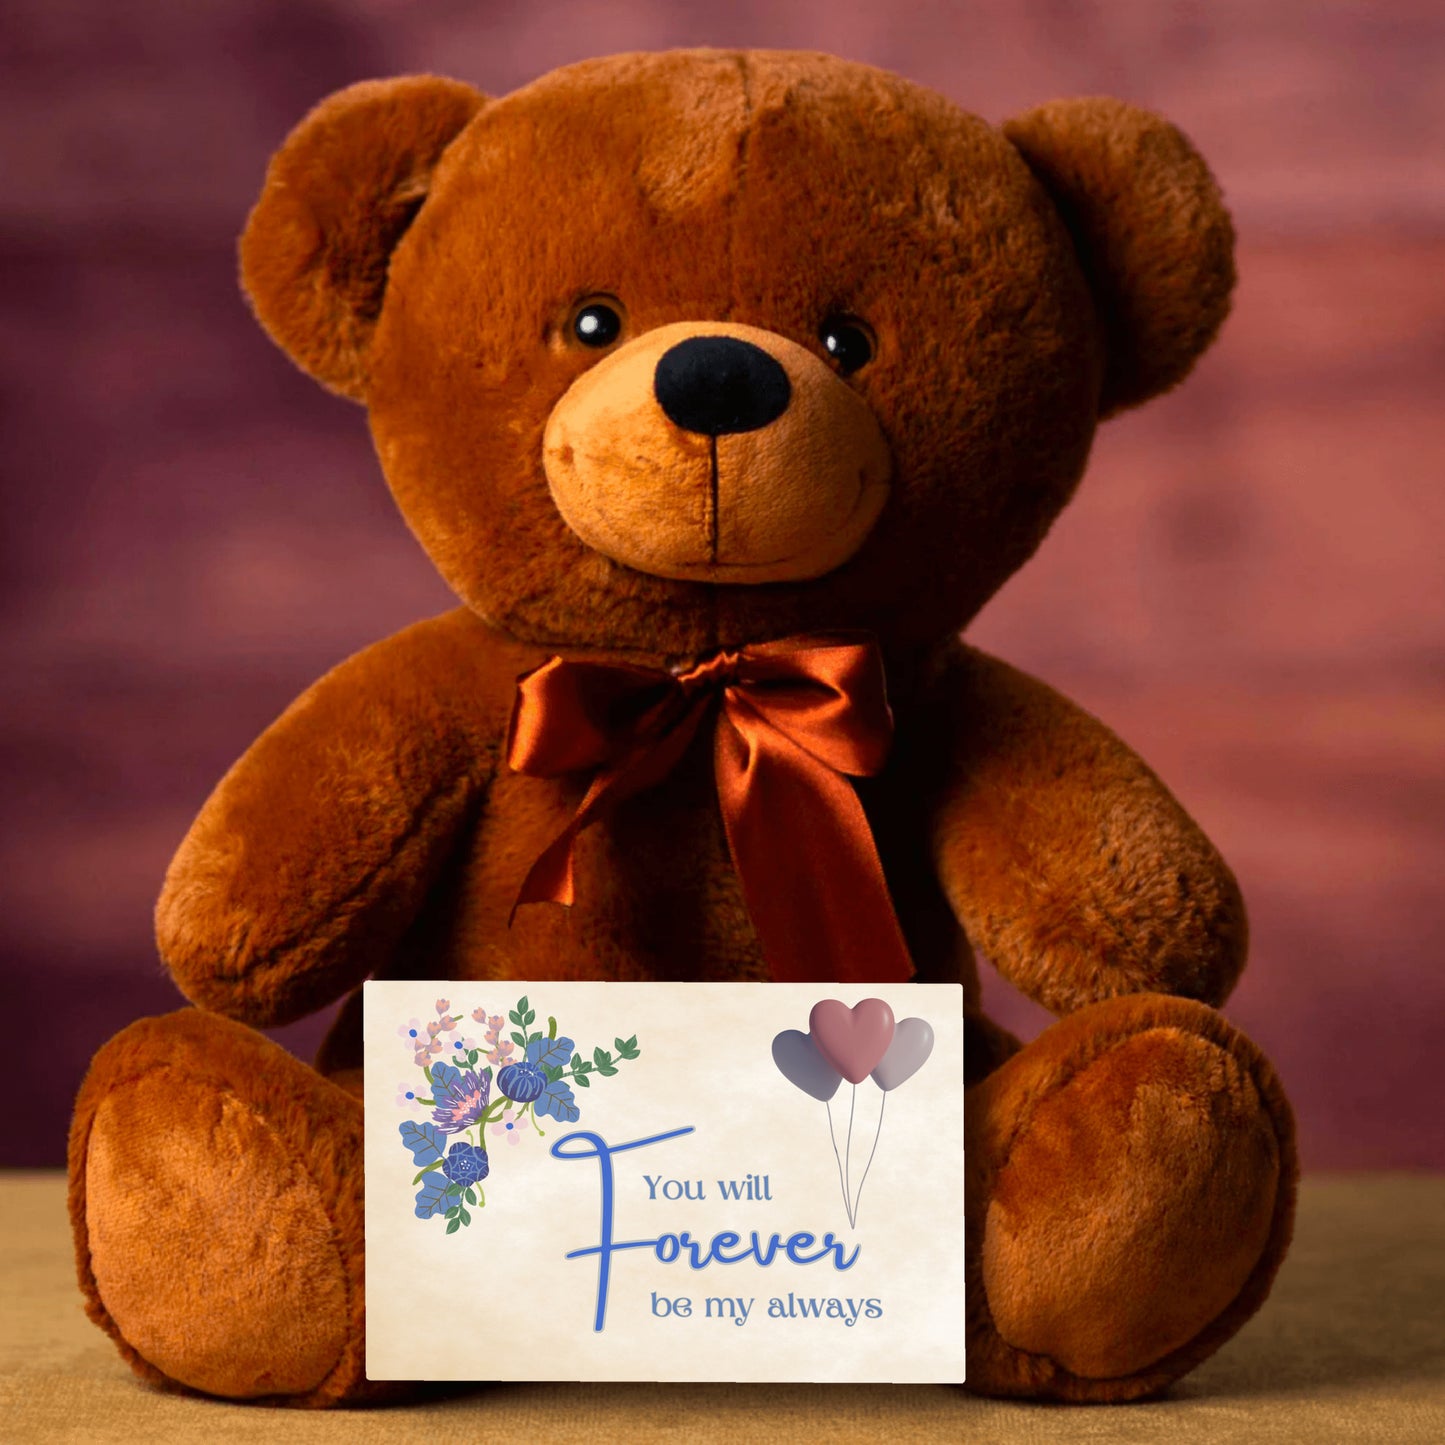 you will forever by my always - Teddy Bear with sign